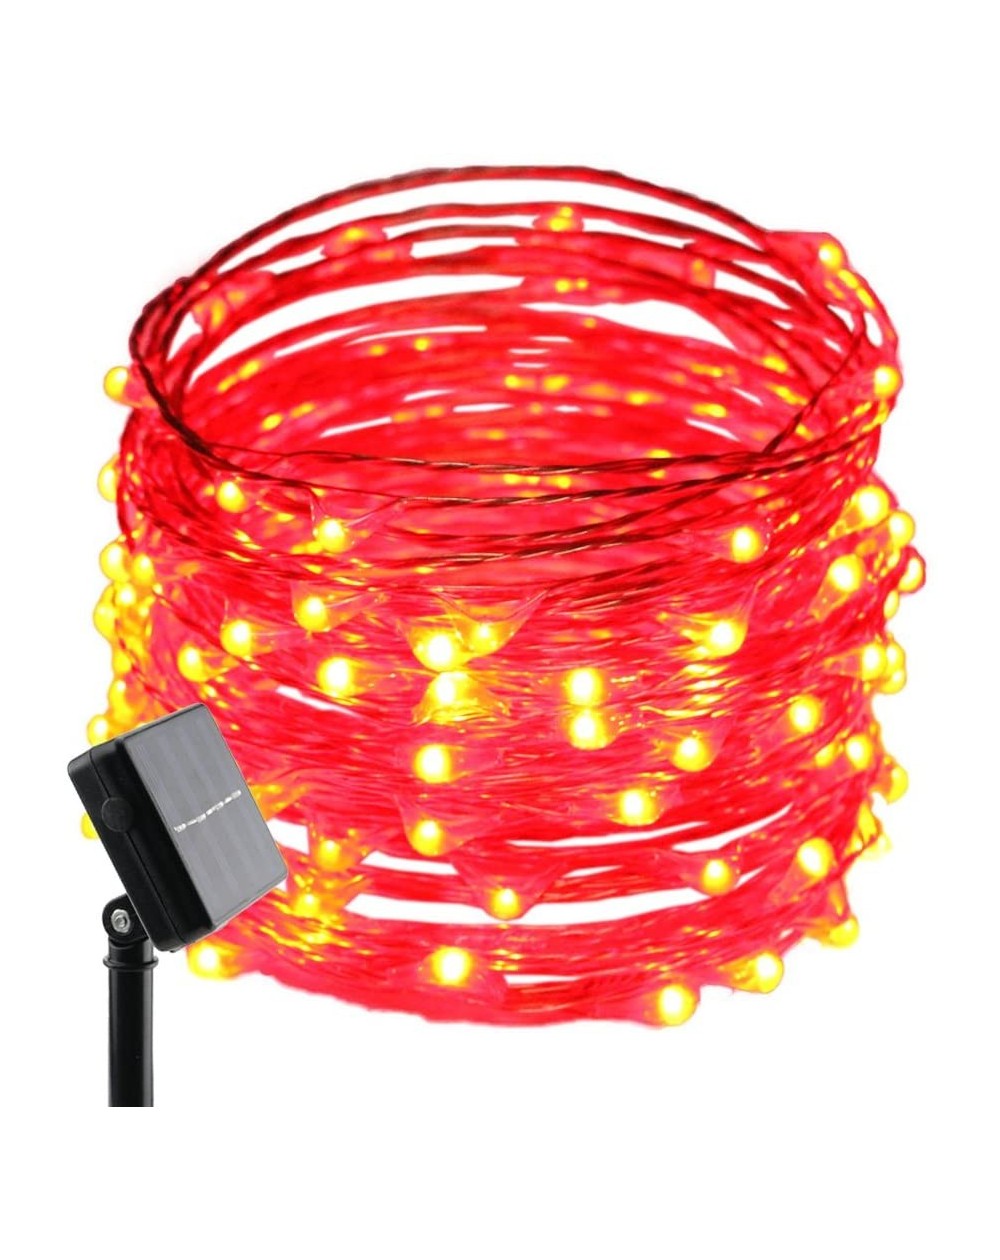 Outdoor String Lights Solar Powered Copper Wire Led String Lights- 33FT 100 LEDs Waterproof 8 Modes Decorative Fairy Lights f...